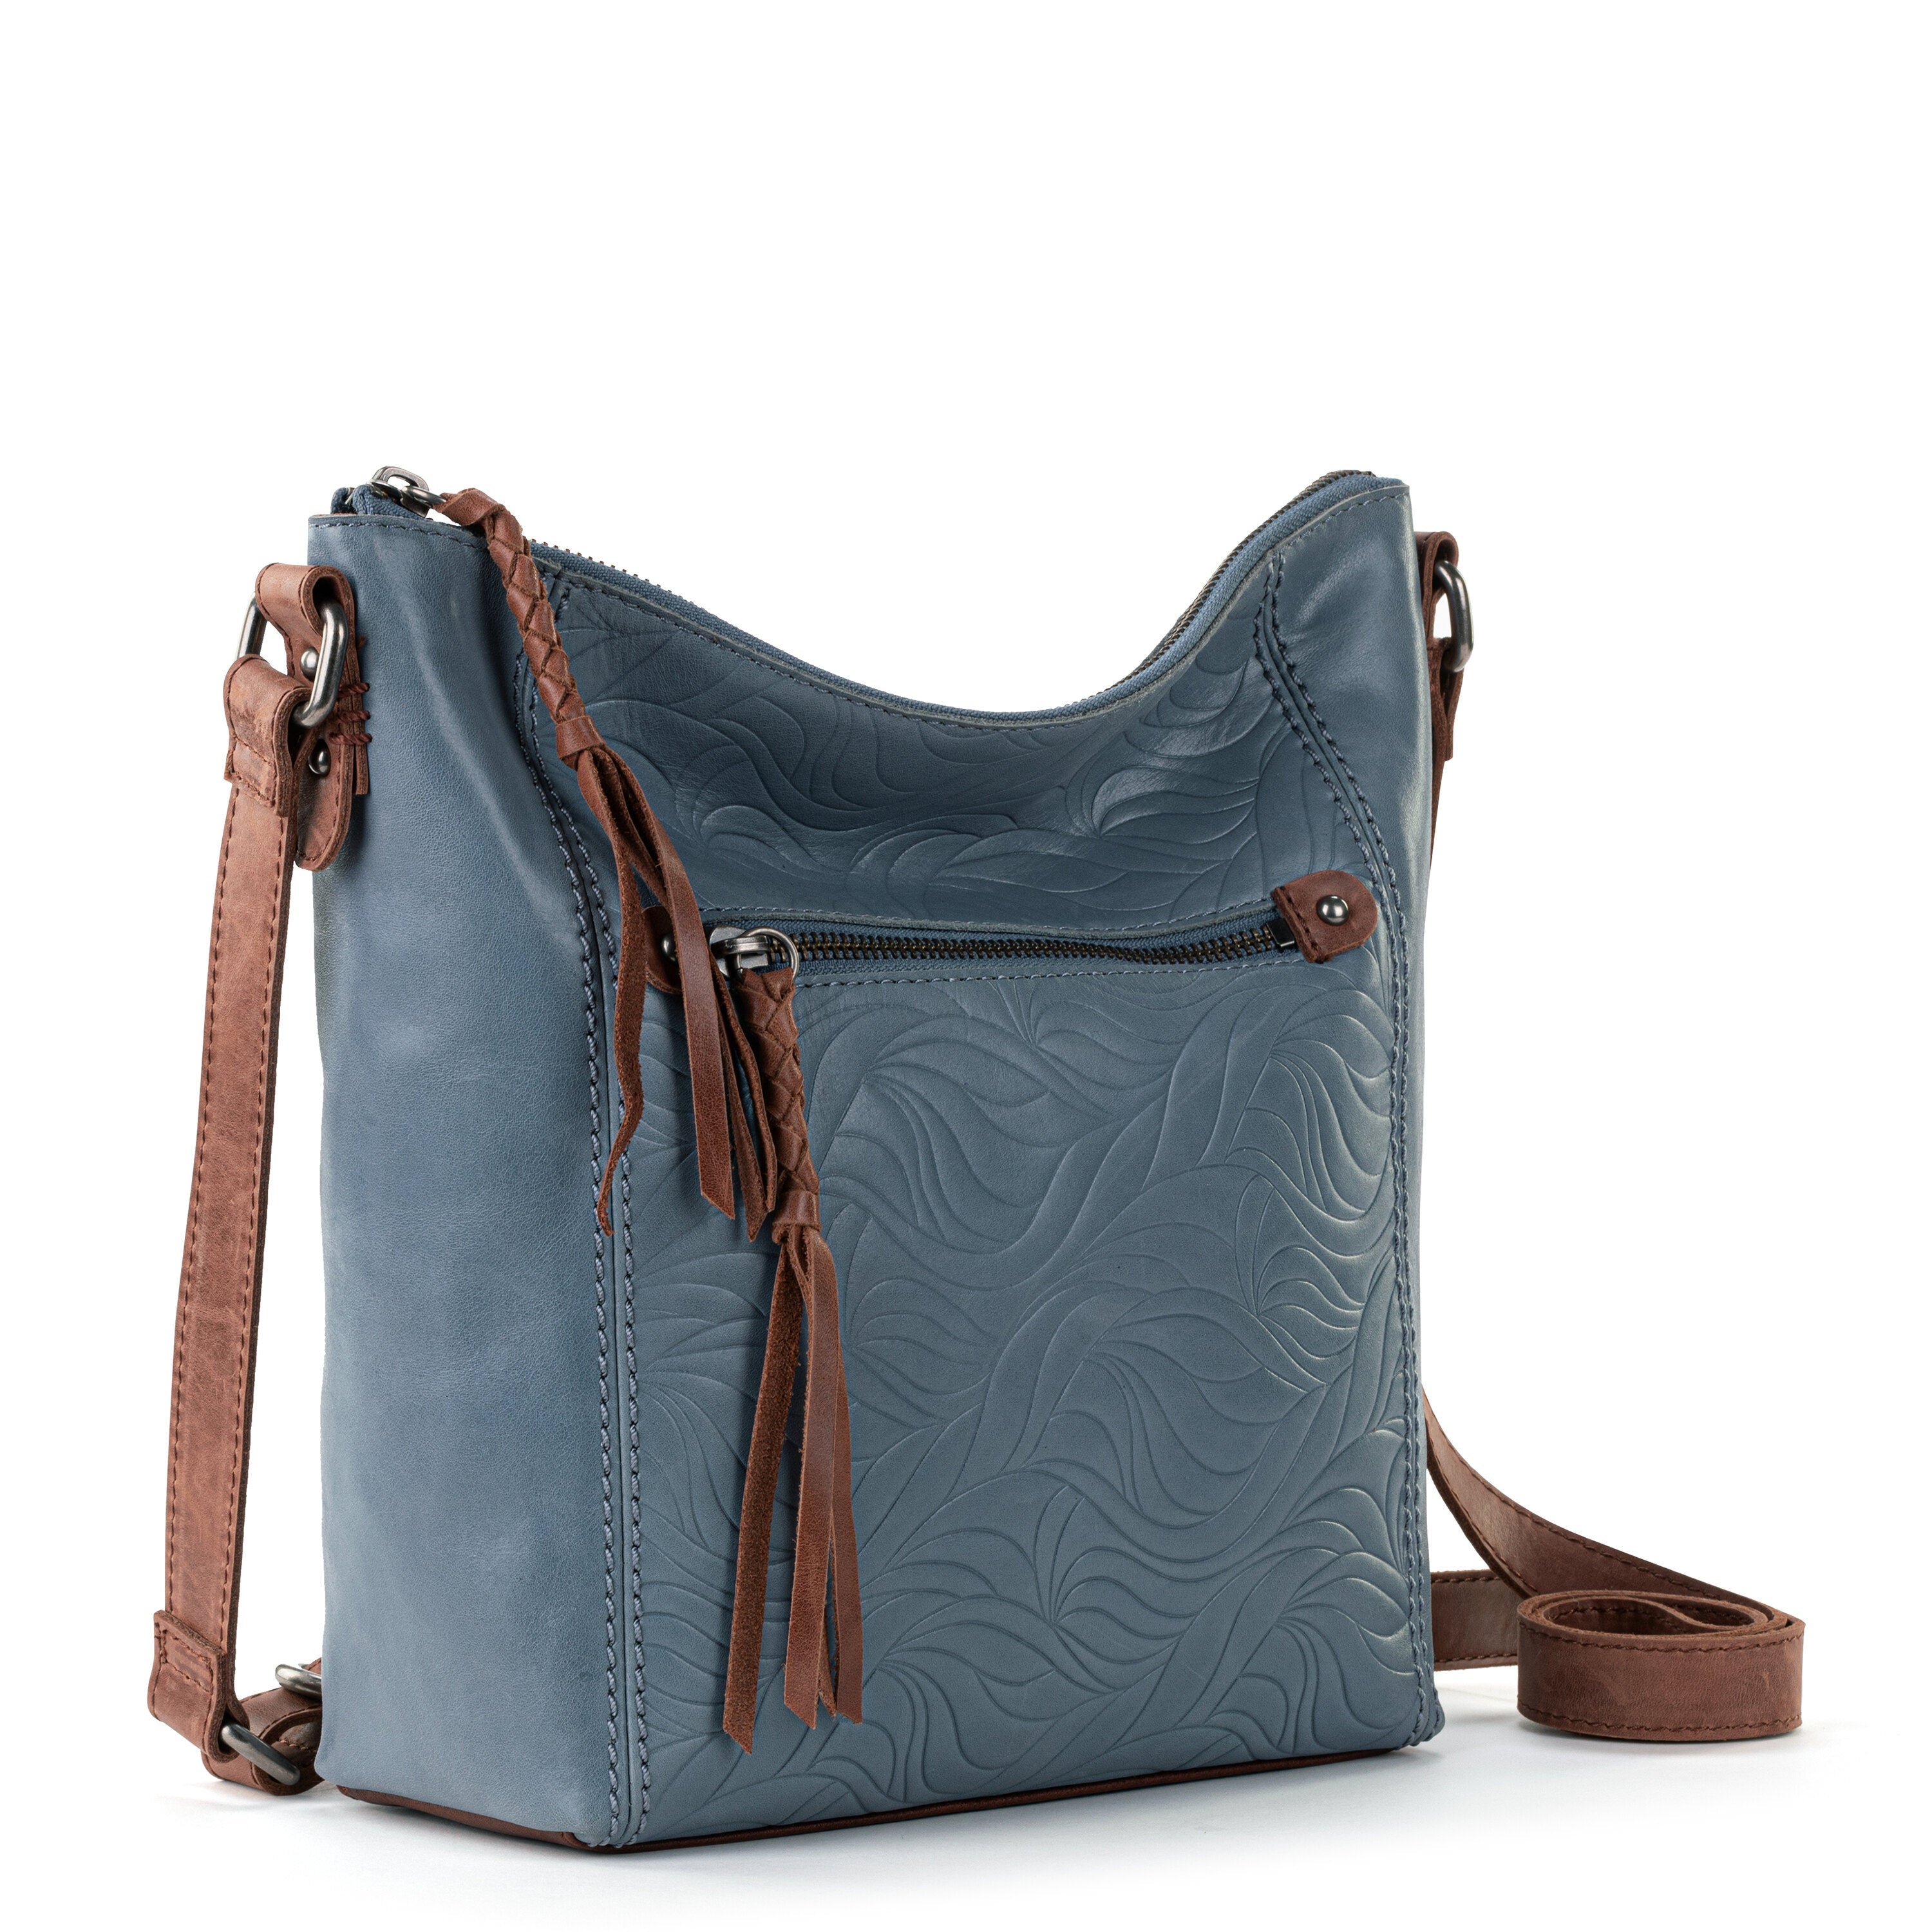 The Sak brings eco-conscious bags to your spring wardrobe | CNN Underscored